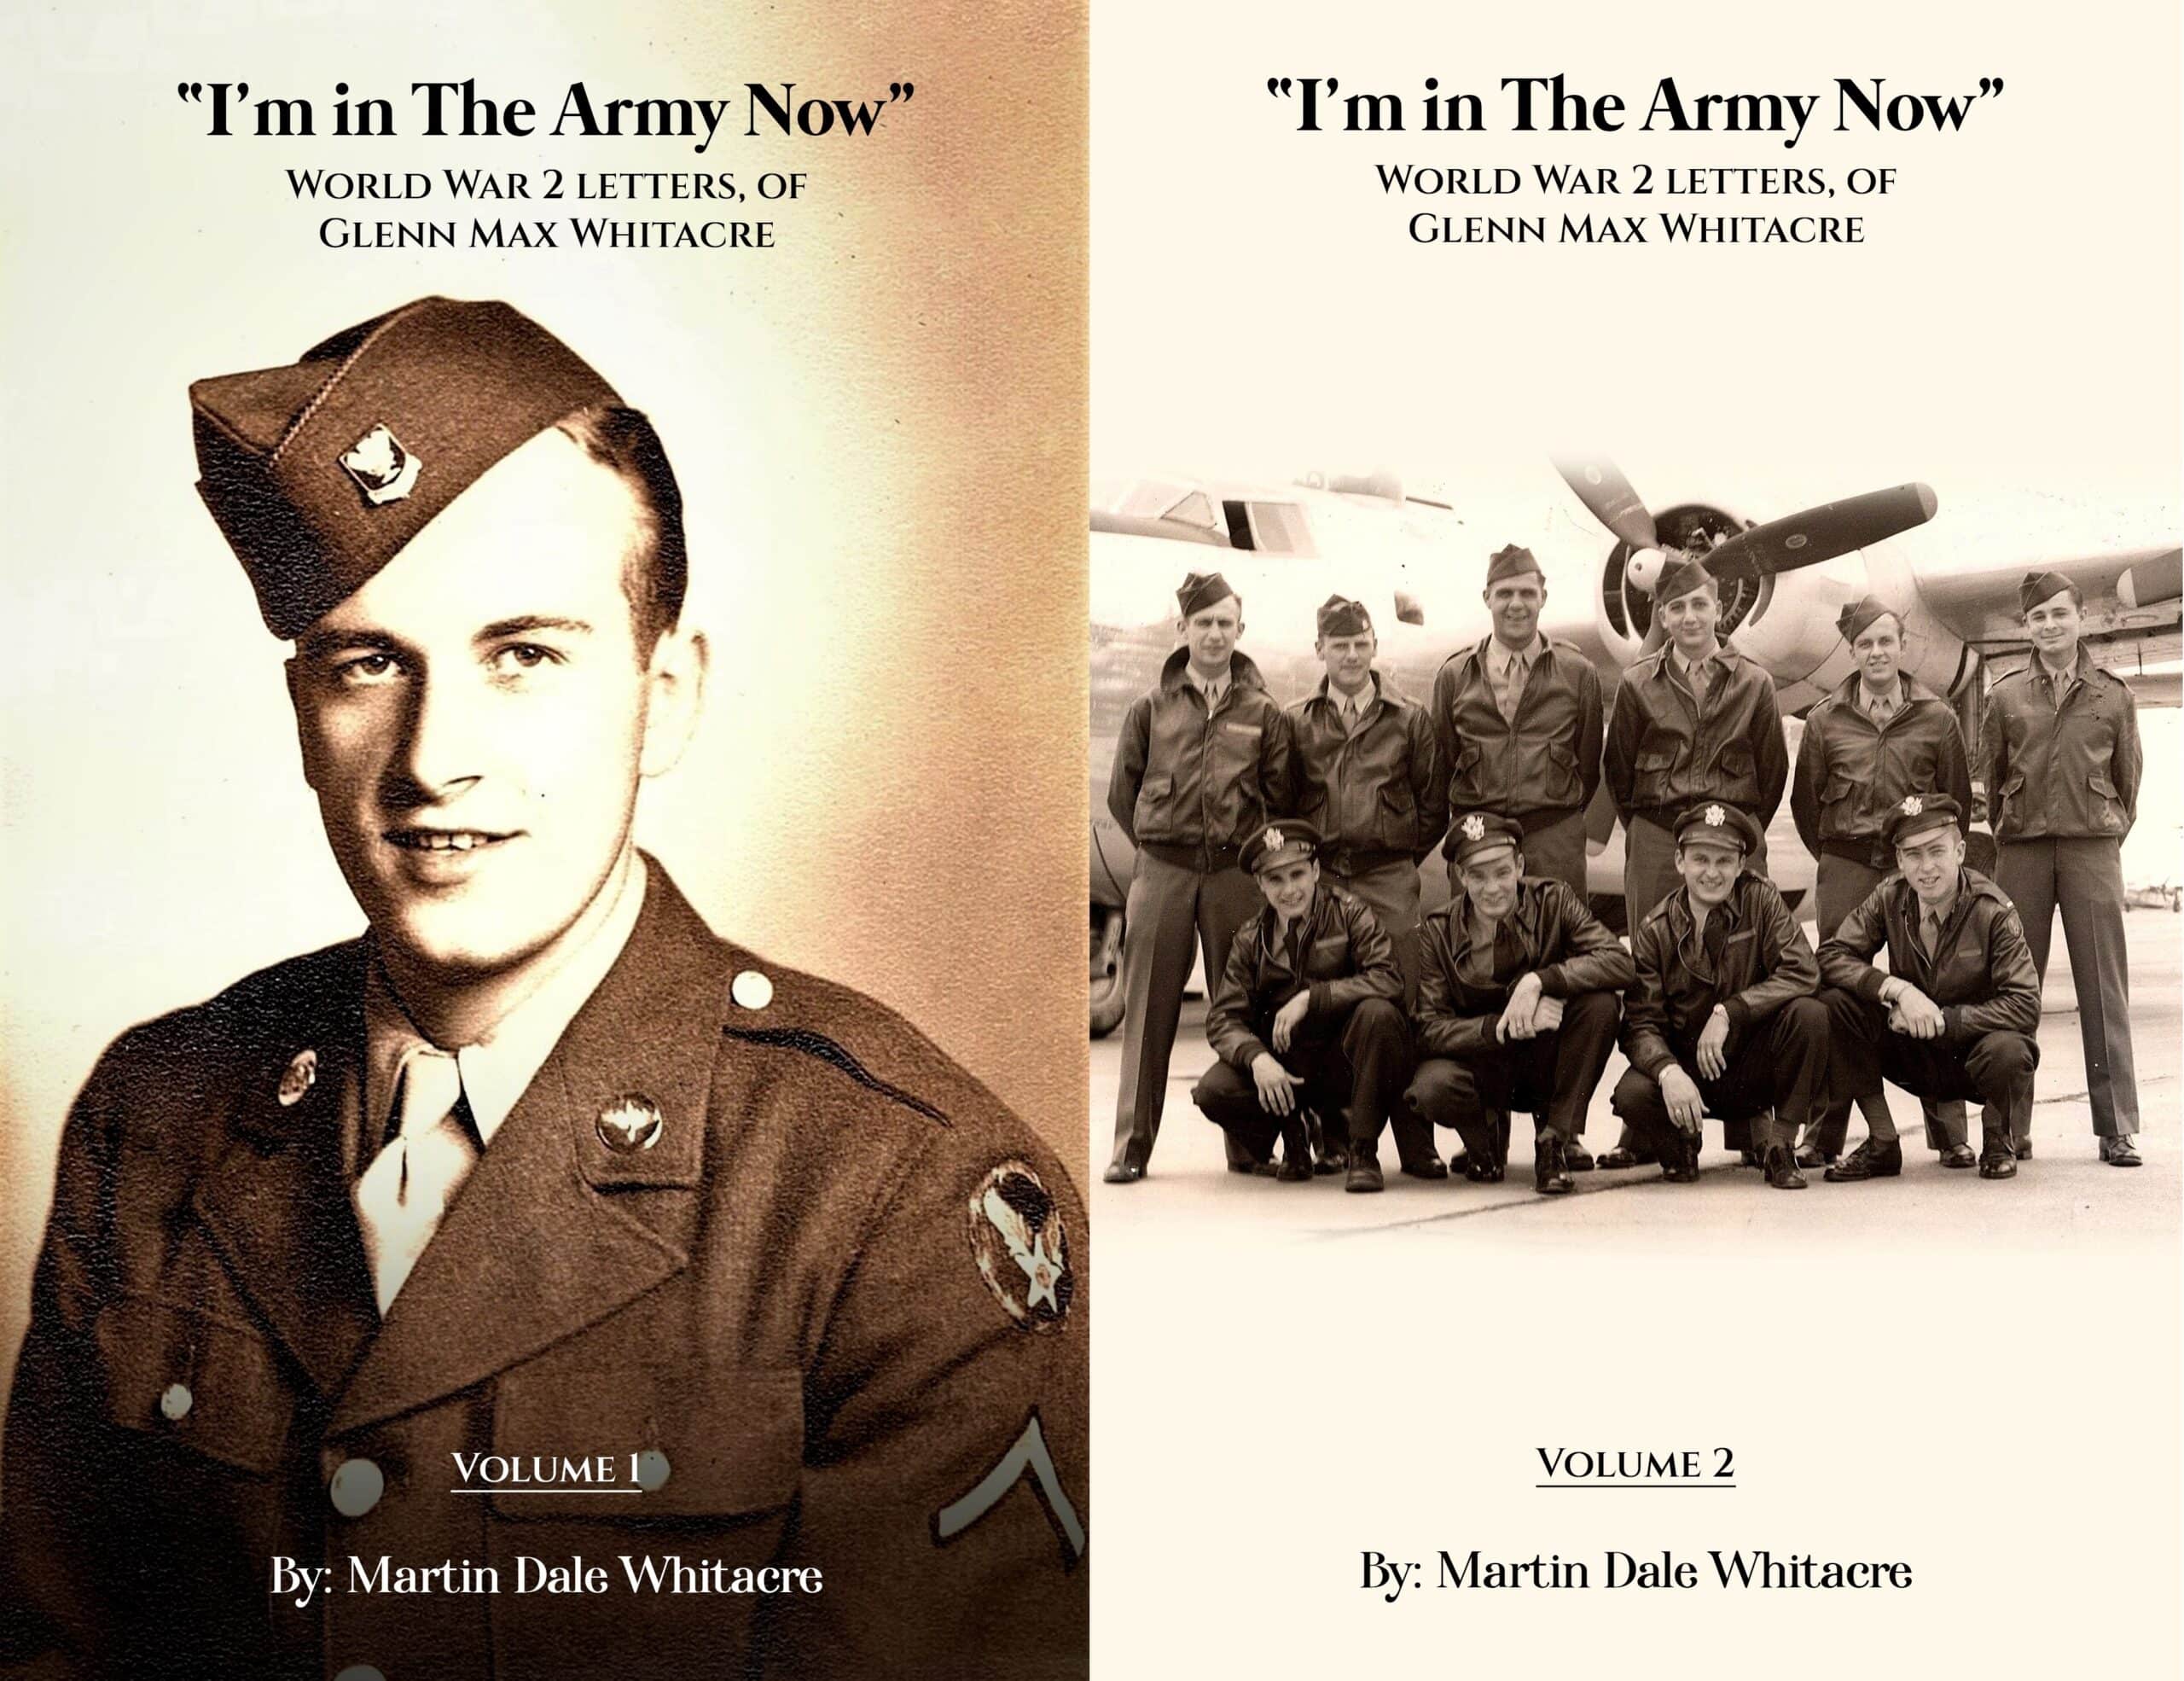 Front covers of I'm in The Army Now, volumes I and II